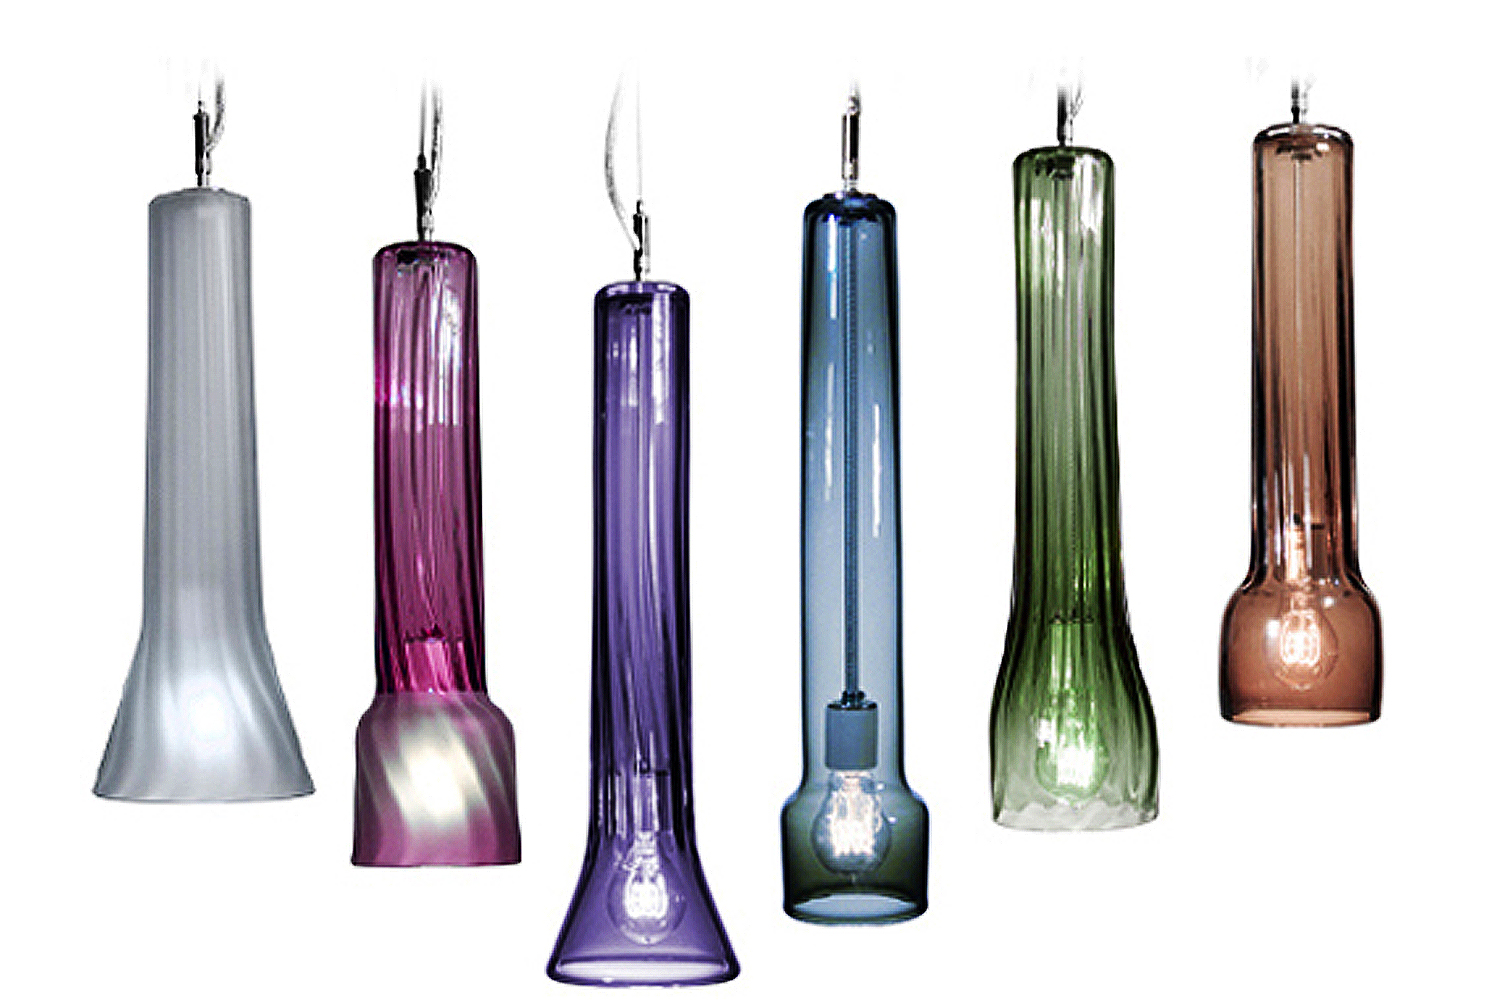 Tempo Luxury Home a studio known for its blown-glass lighting designs launched the Flashlight collection